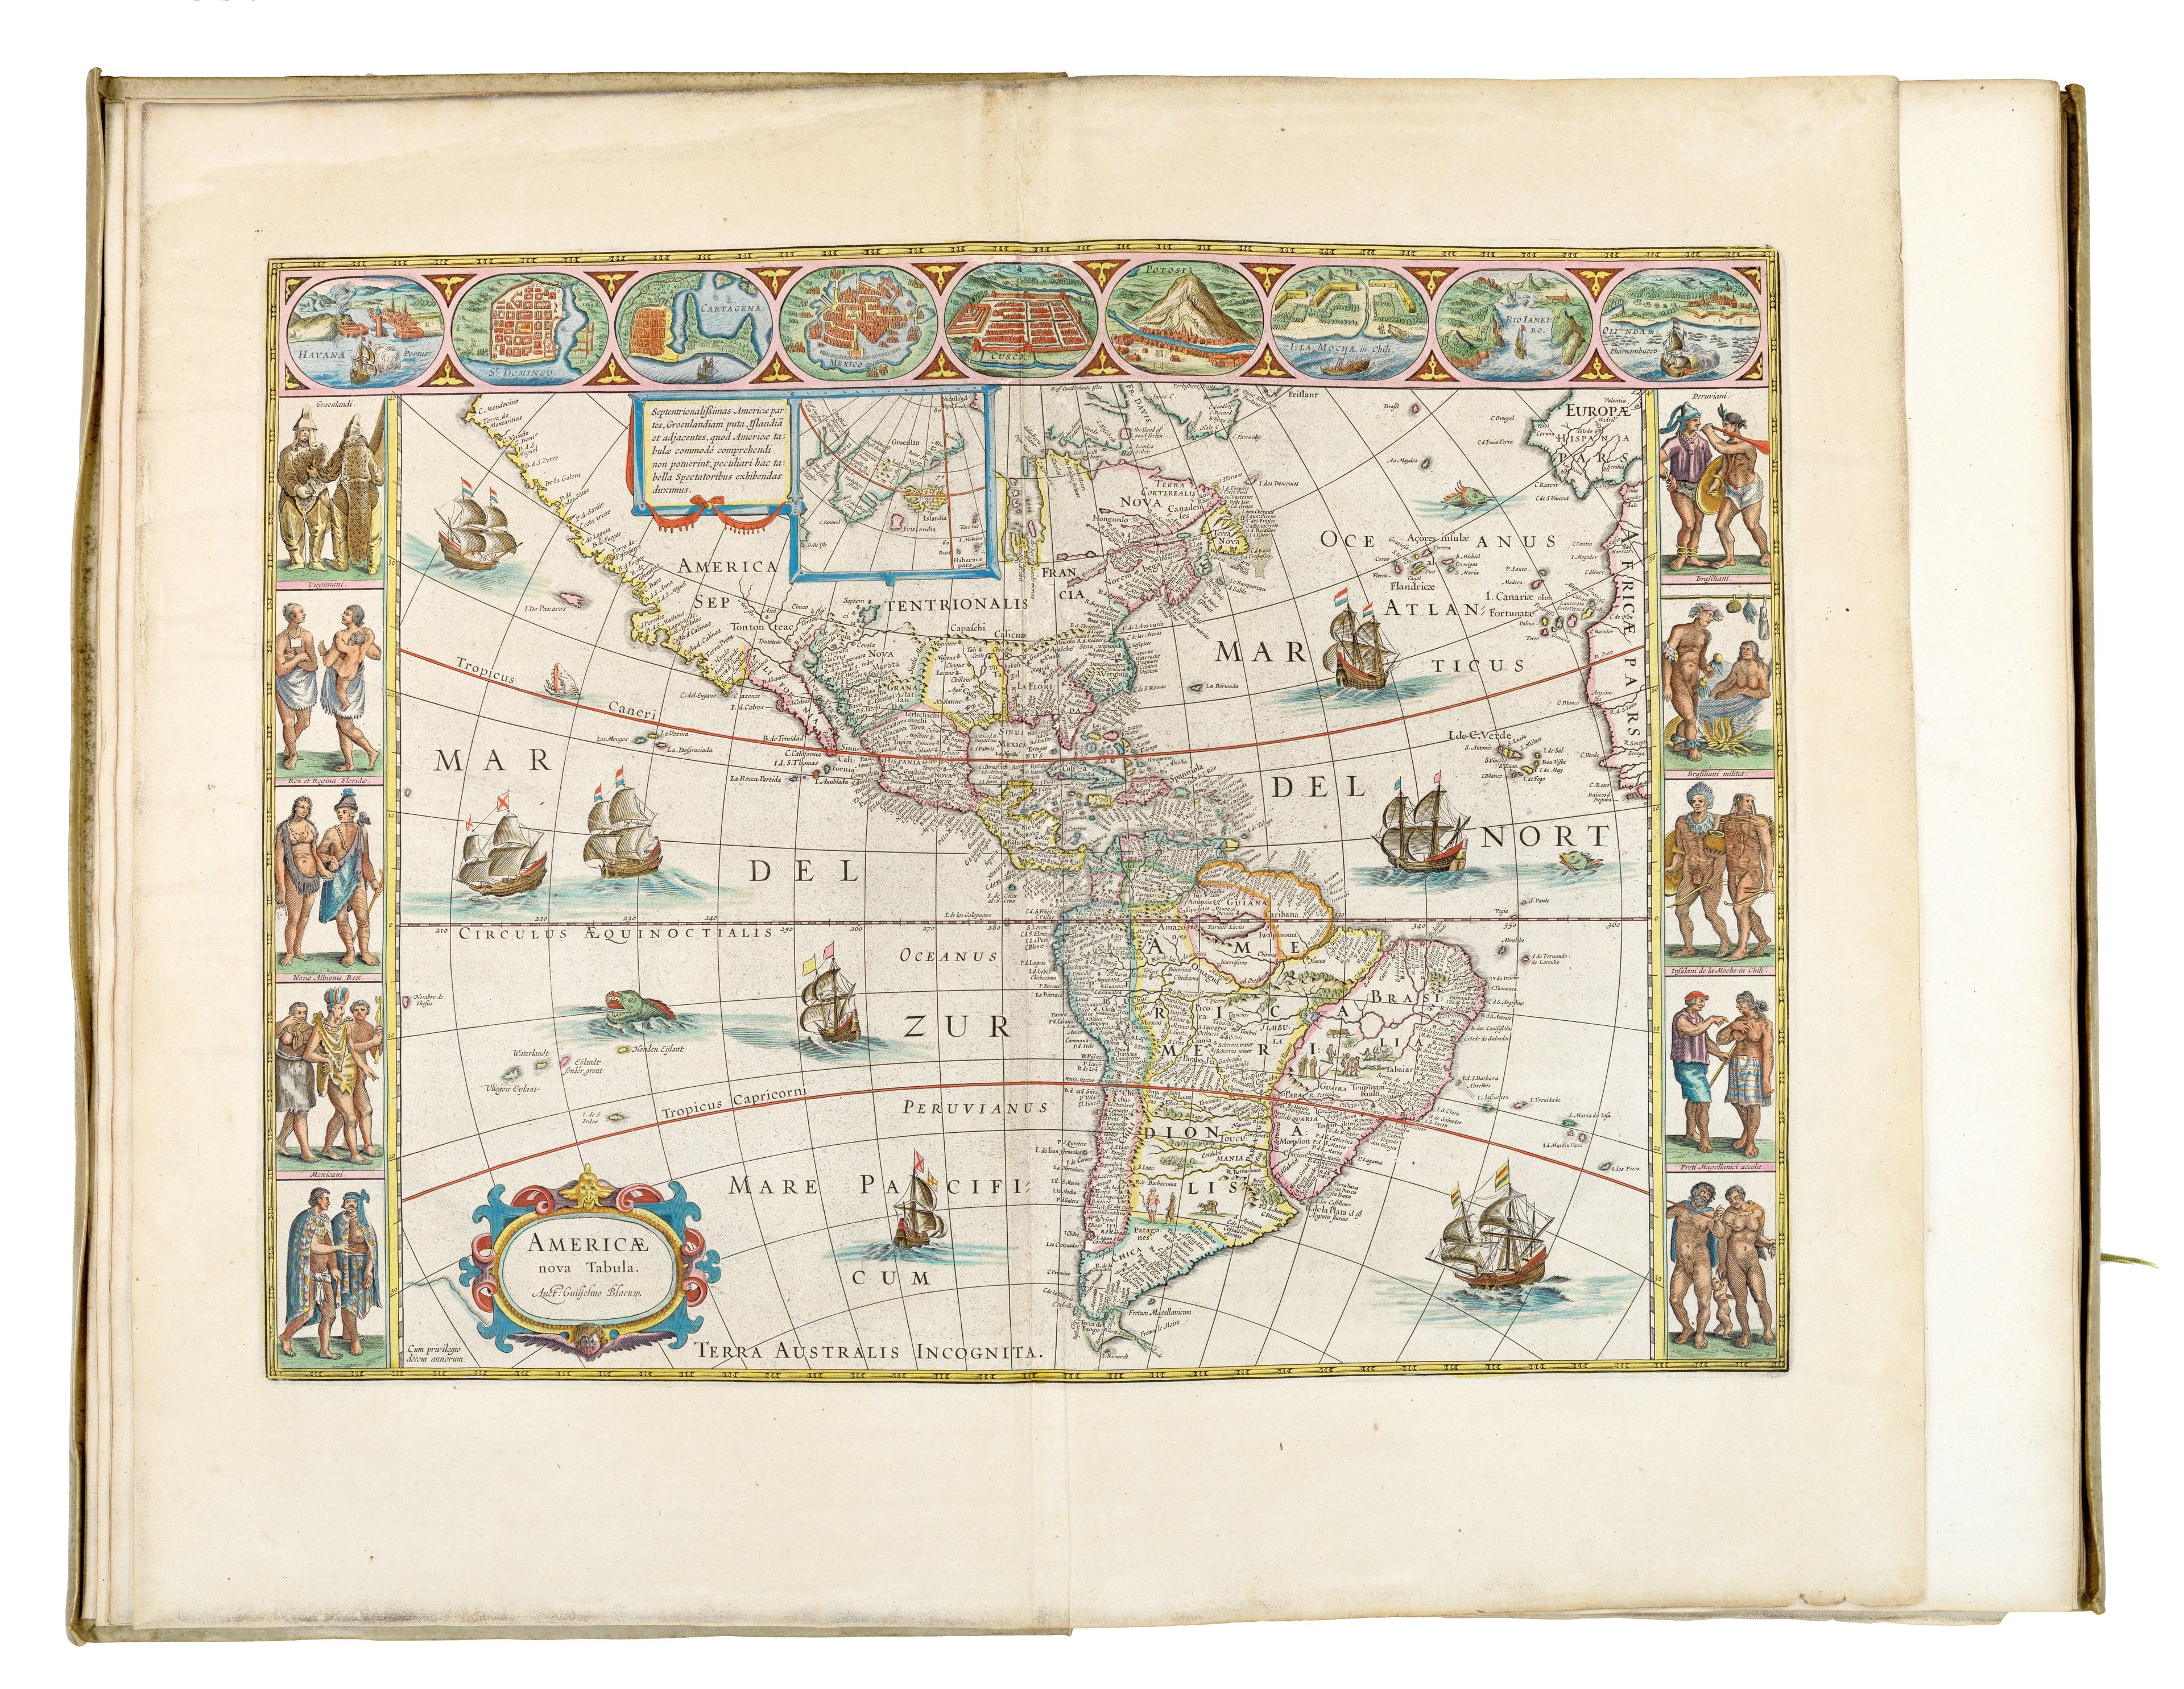 A copperplate engraving in an atlas of North and South America, finely engraved, coloured, and surrounded by illustrations of local people from the region.